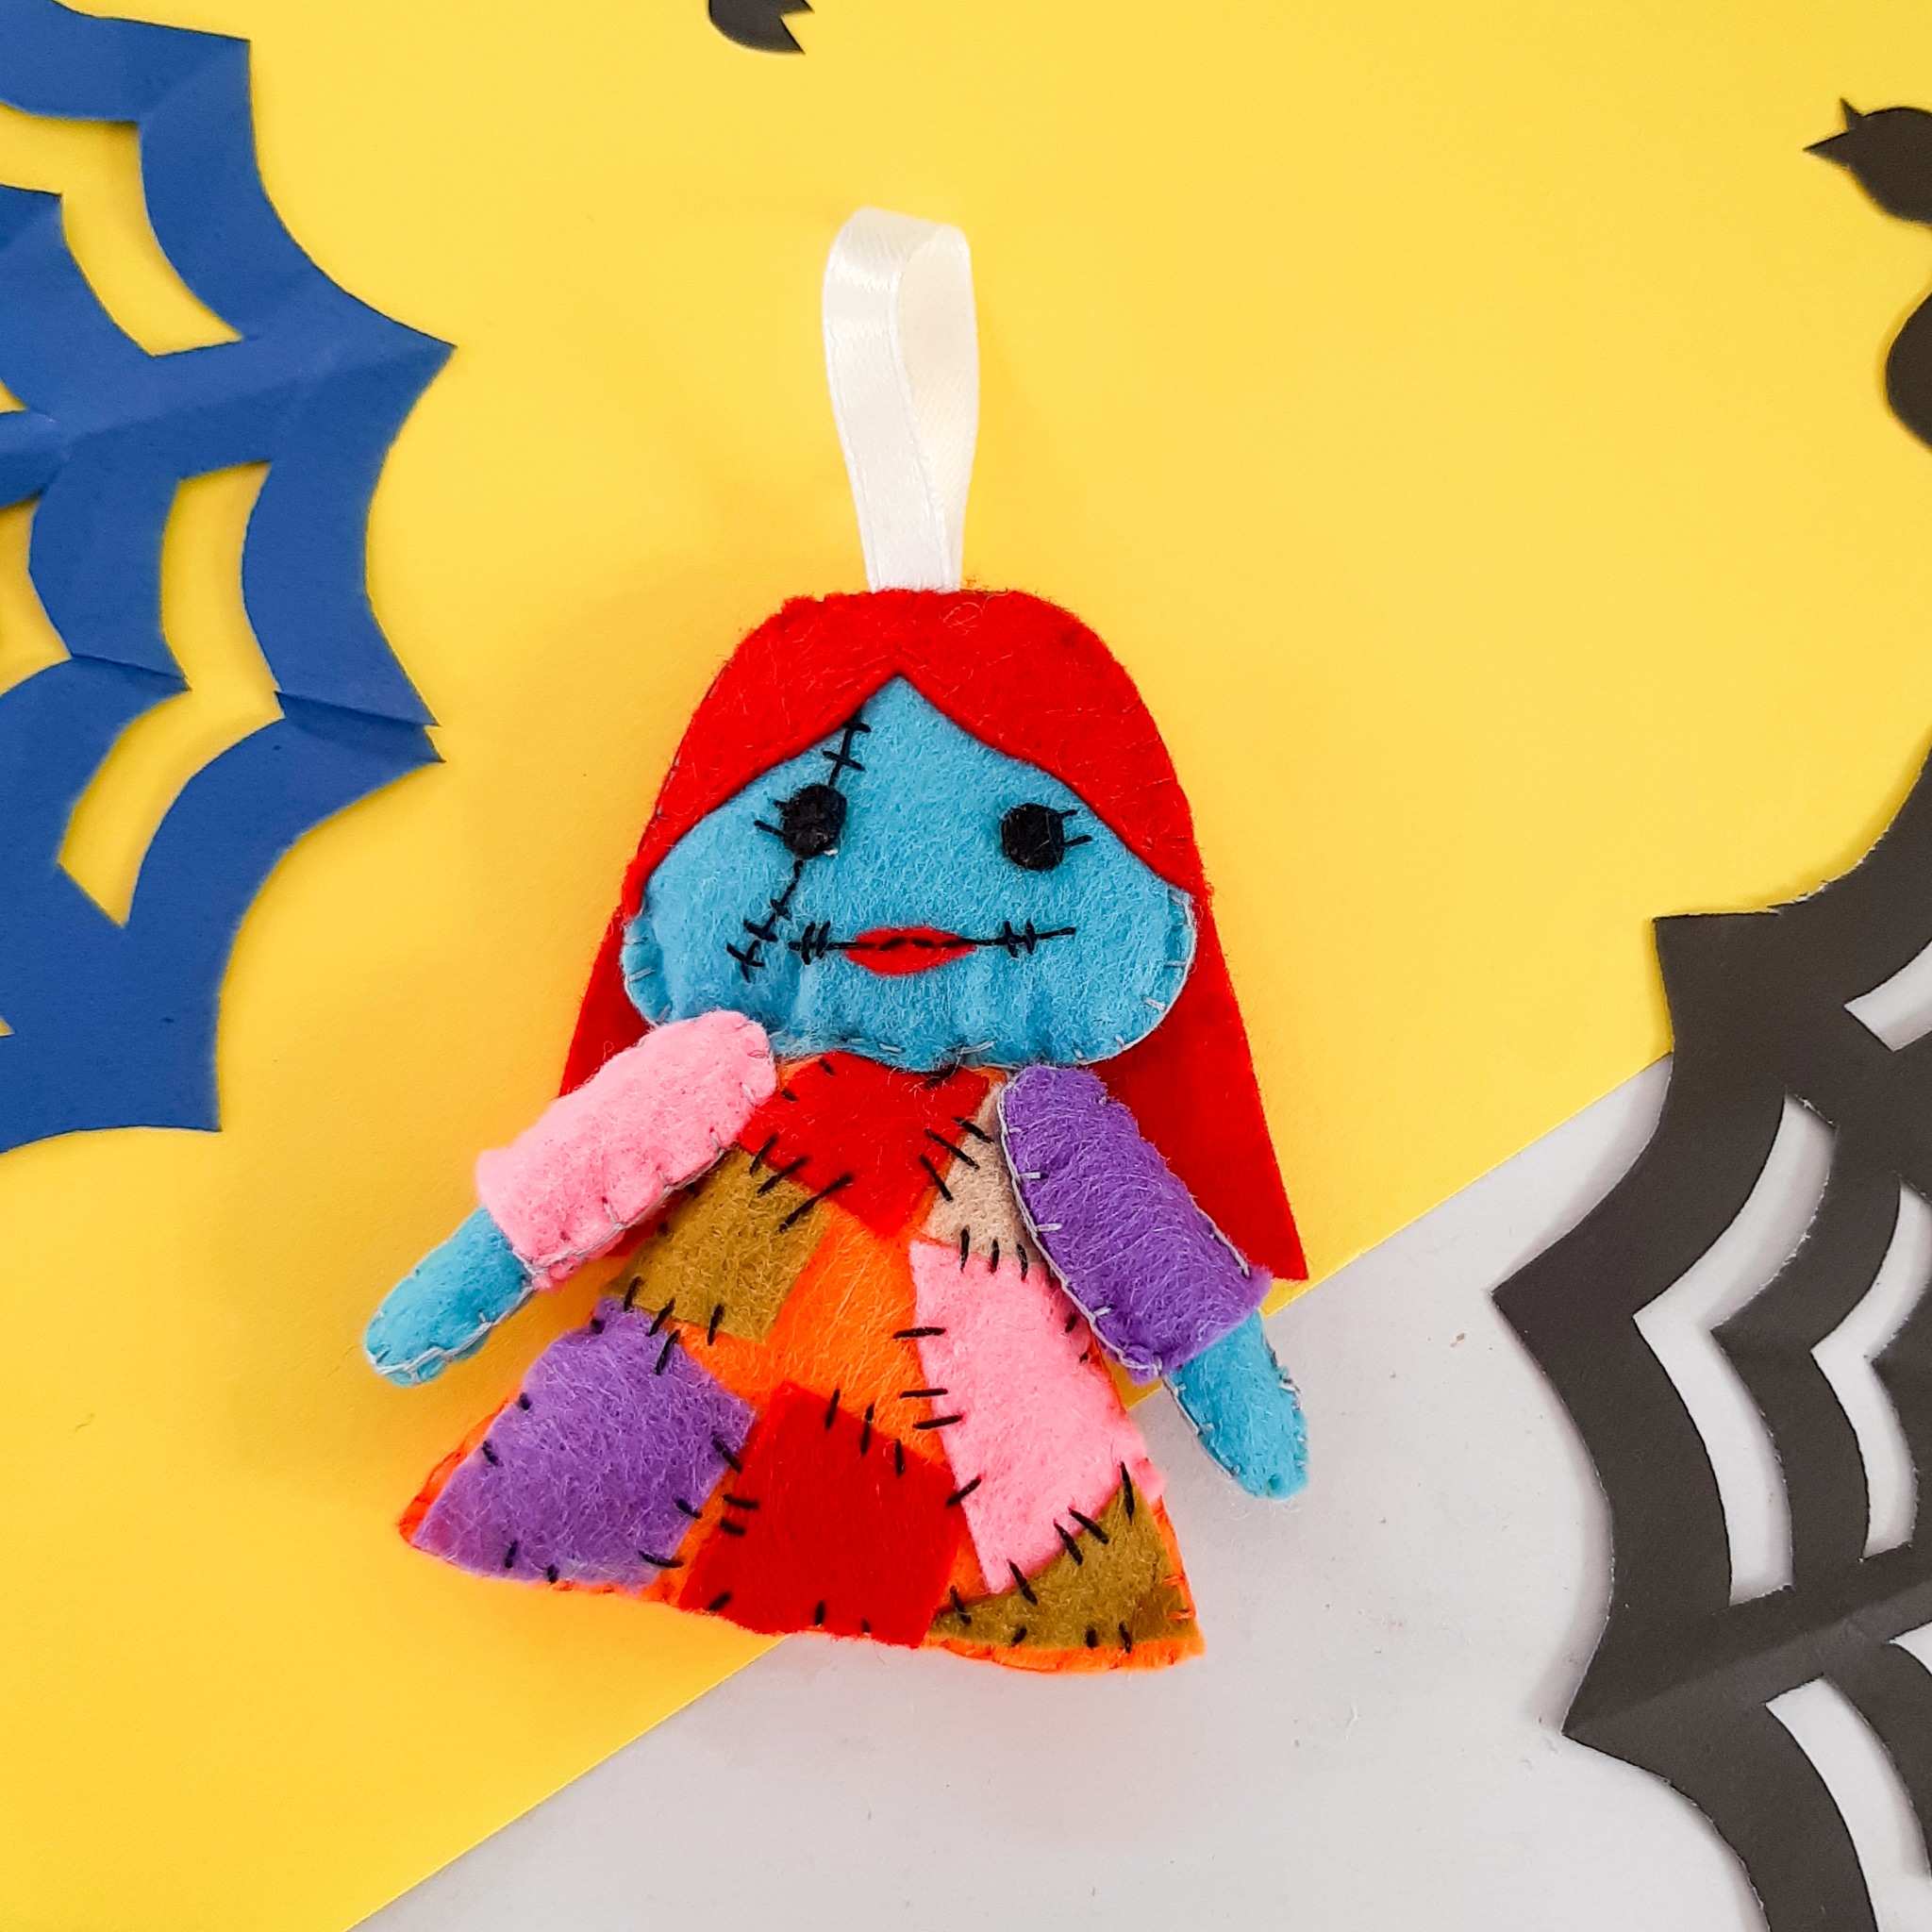 How to Sew Sally from Nightmare Before Christmas (Free Pattern for Felt Craft)